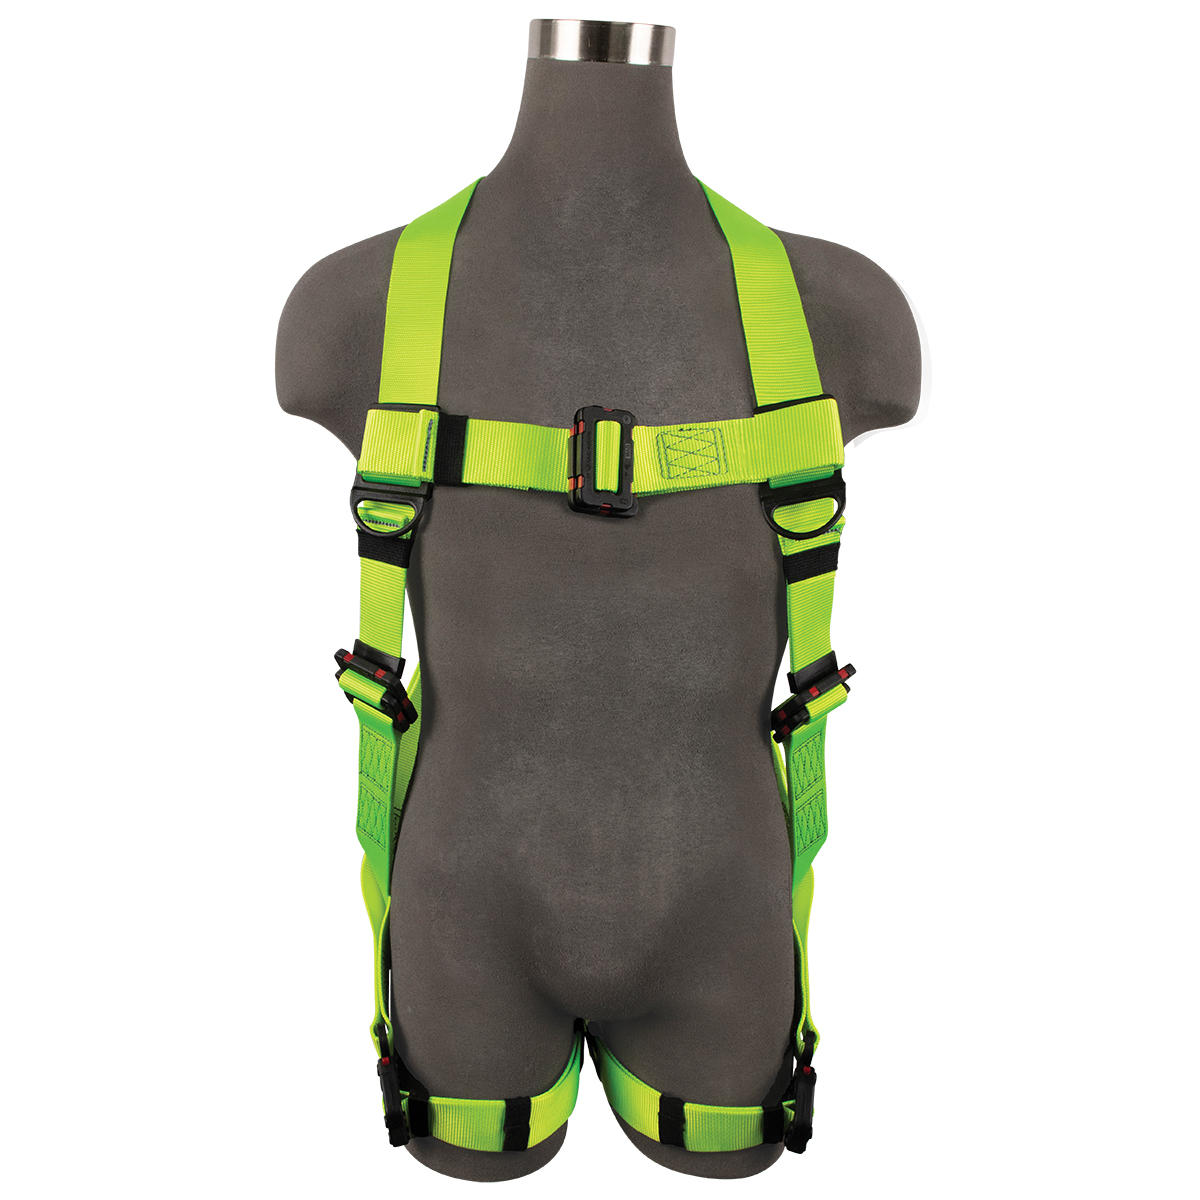 SAFEWAZE PRO+ Arc Flash Dielectric Harness with Pass through Dielectric on Chest and Quick-Connect Legs: 3XL